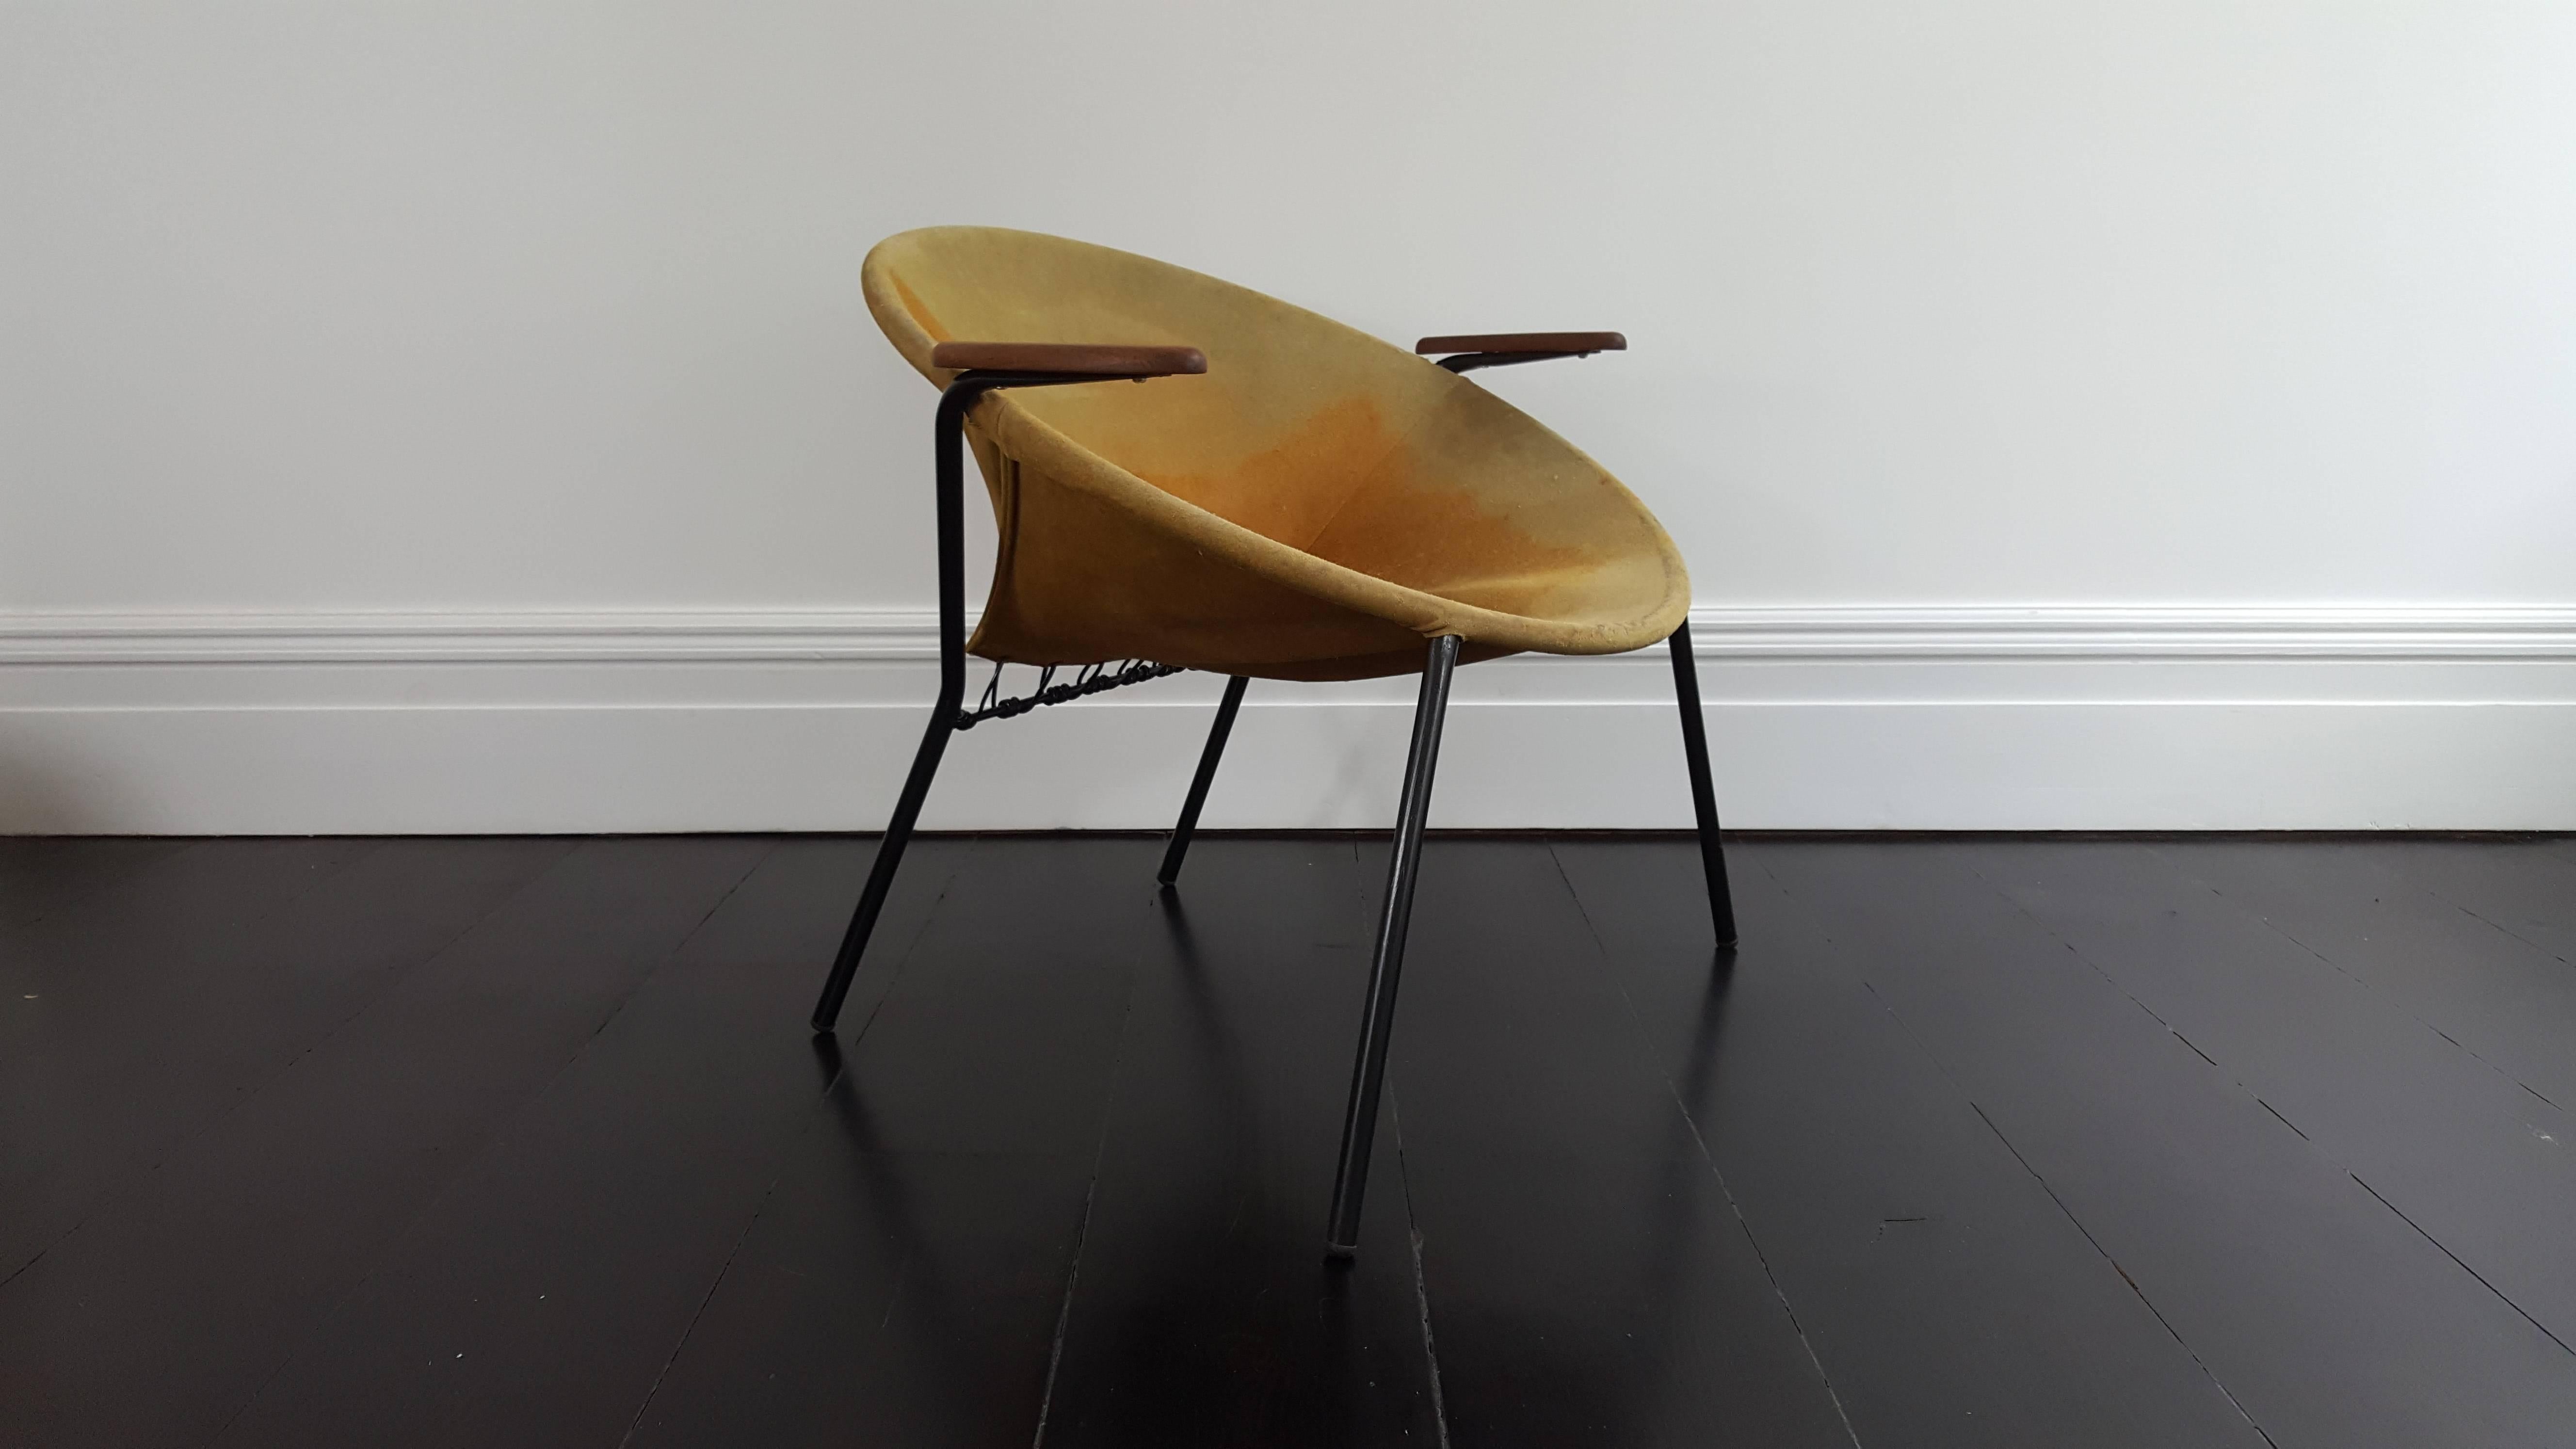 Balloon / hoop chair by Hans Olsen and produced in Denmark by Lea Design during the 1960s. Original tan suede and metal frame with dark teak arms.

Condition: Medium wear, plenty of patina, some marks - there is inconsistent fading to the chair